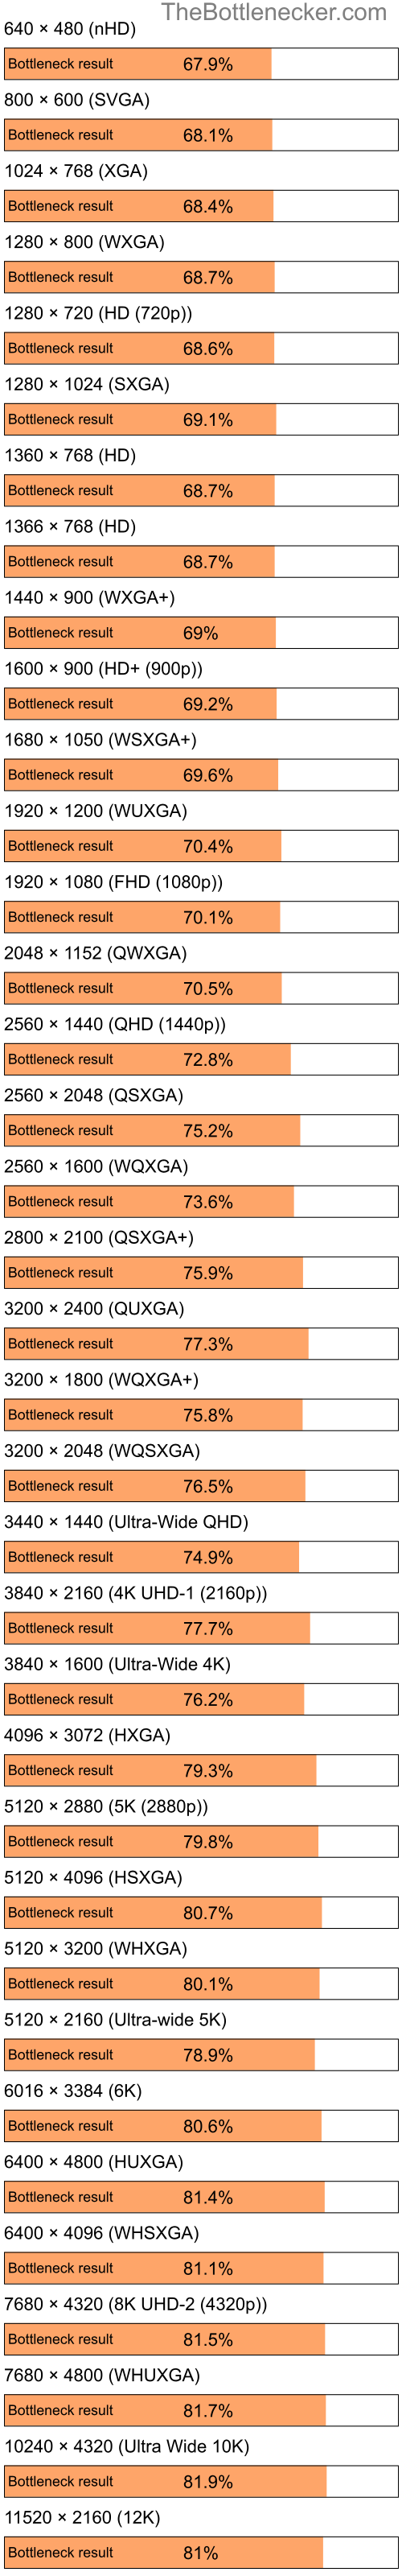 Bottleneck results by resolution for Intel Celeron M and AMD Mobility Radeon X700 in General Tasks